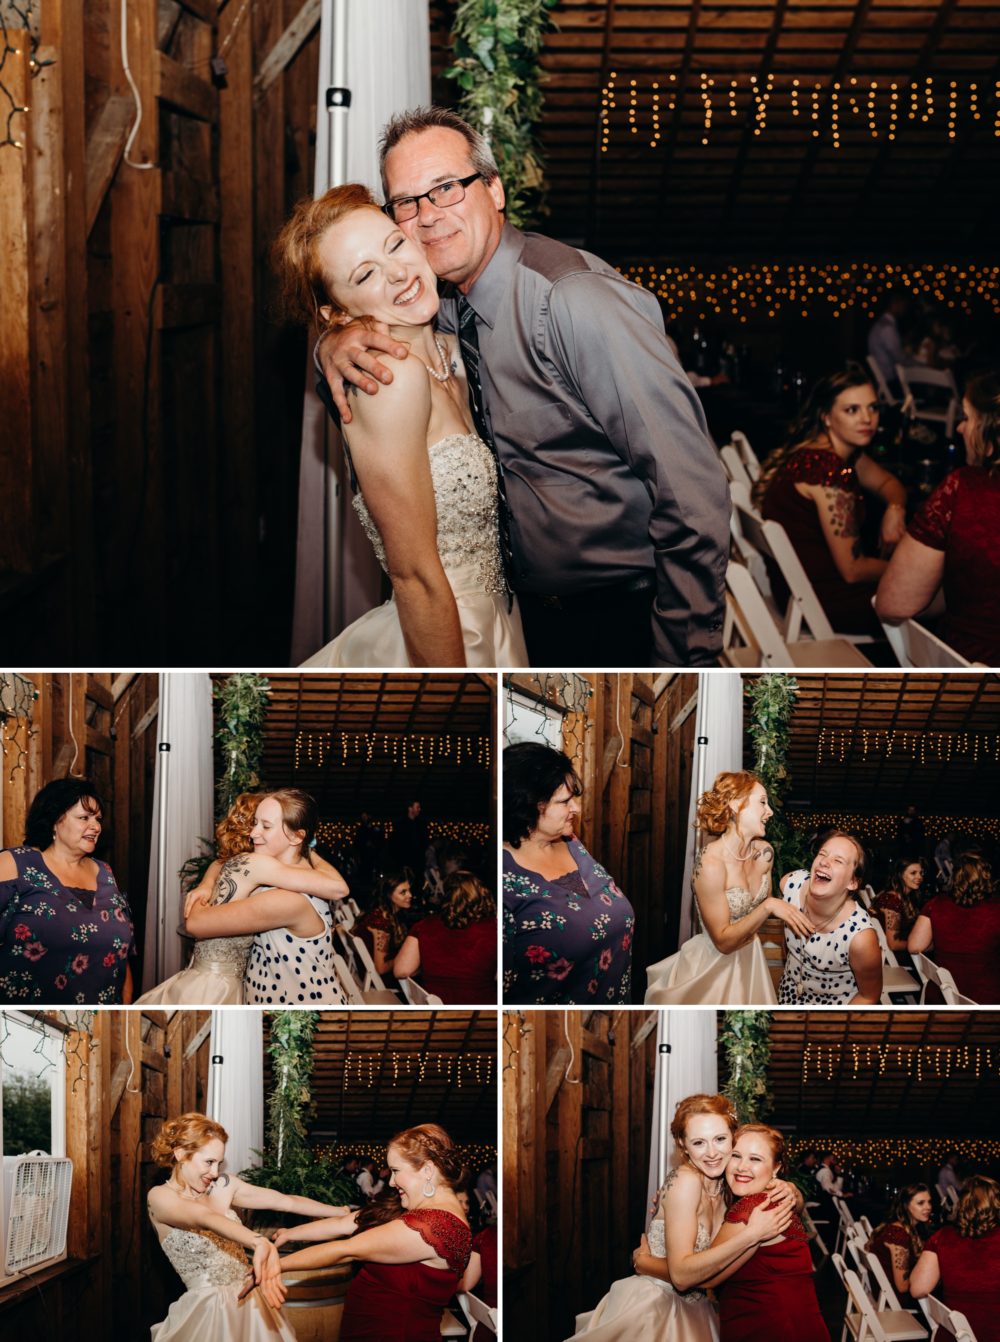 Guest portraits with the bride - Bostic Lake Ranch Wedding in Redmond, WA by Briana Morrison